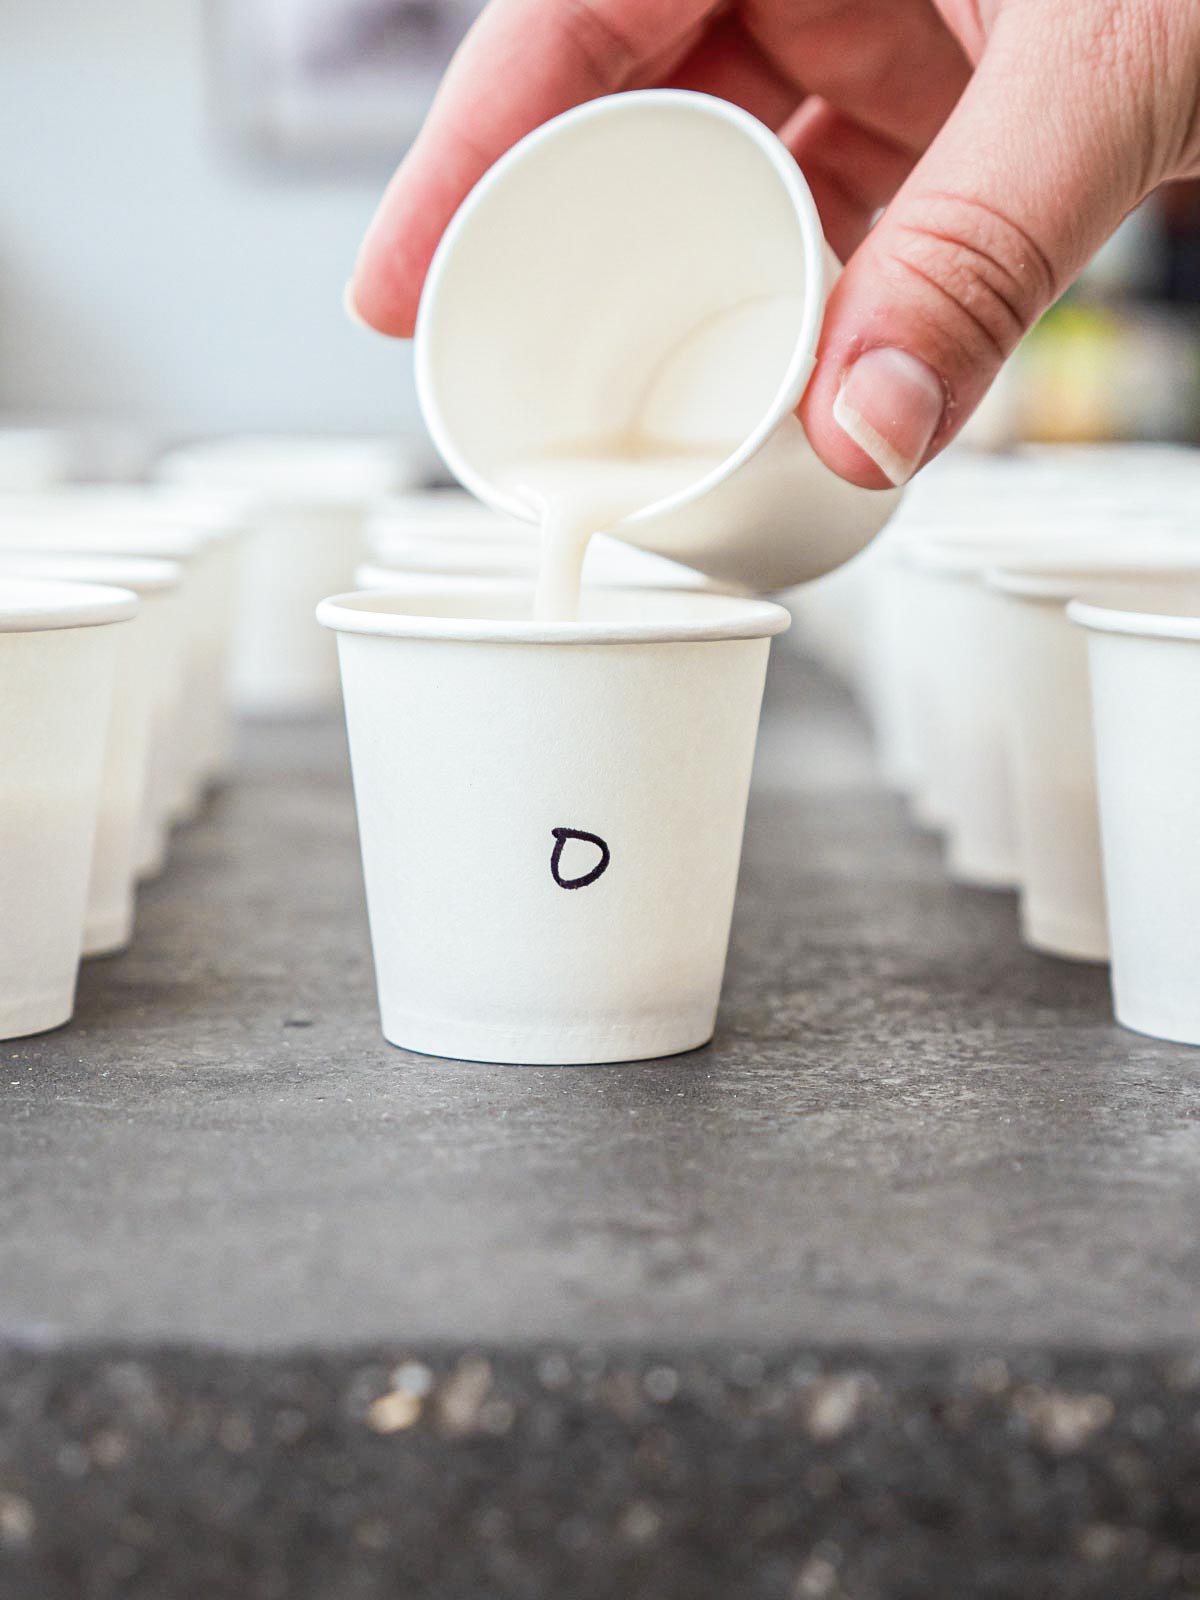 pouring almond milk brand into test cup.